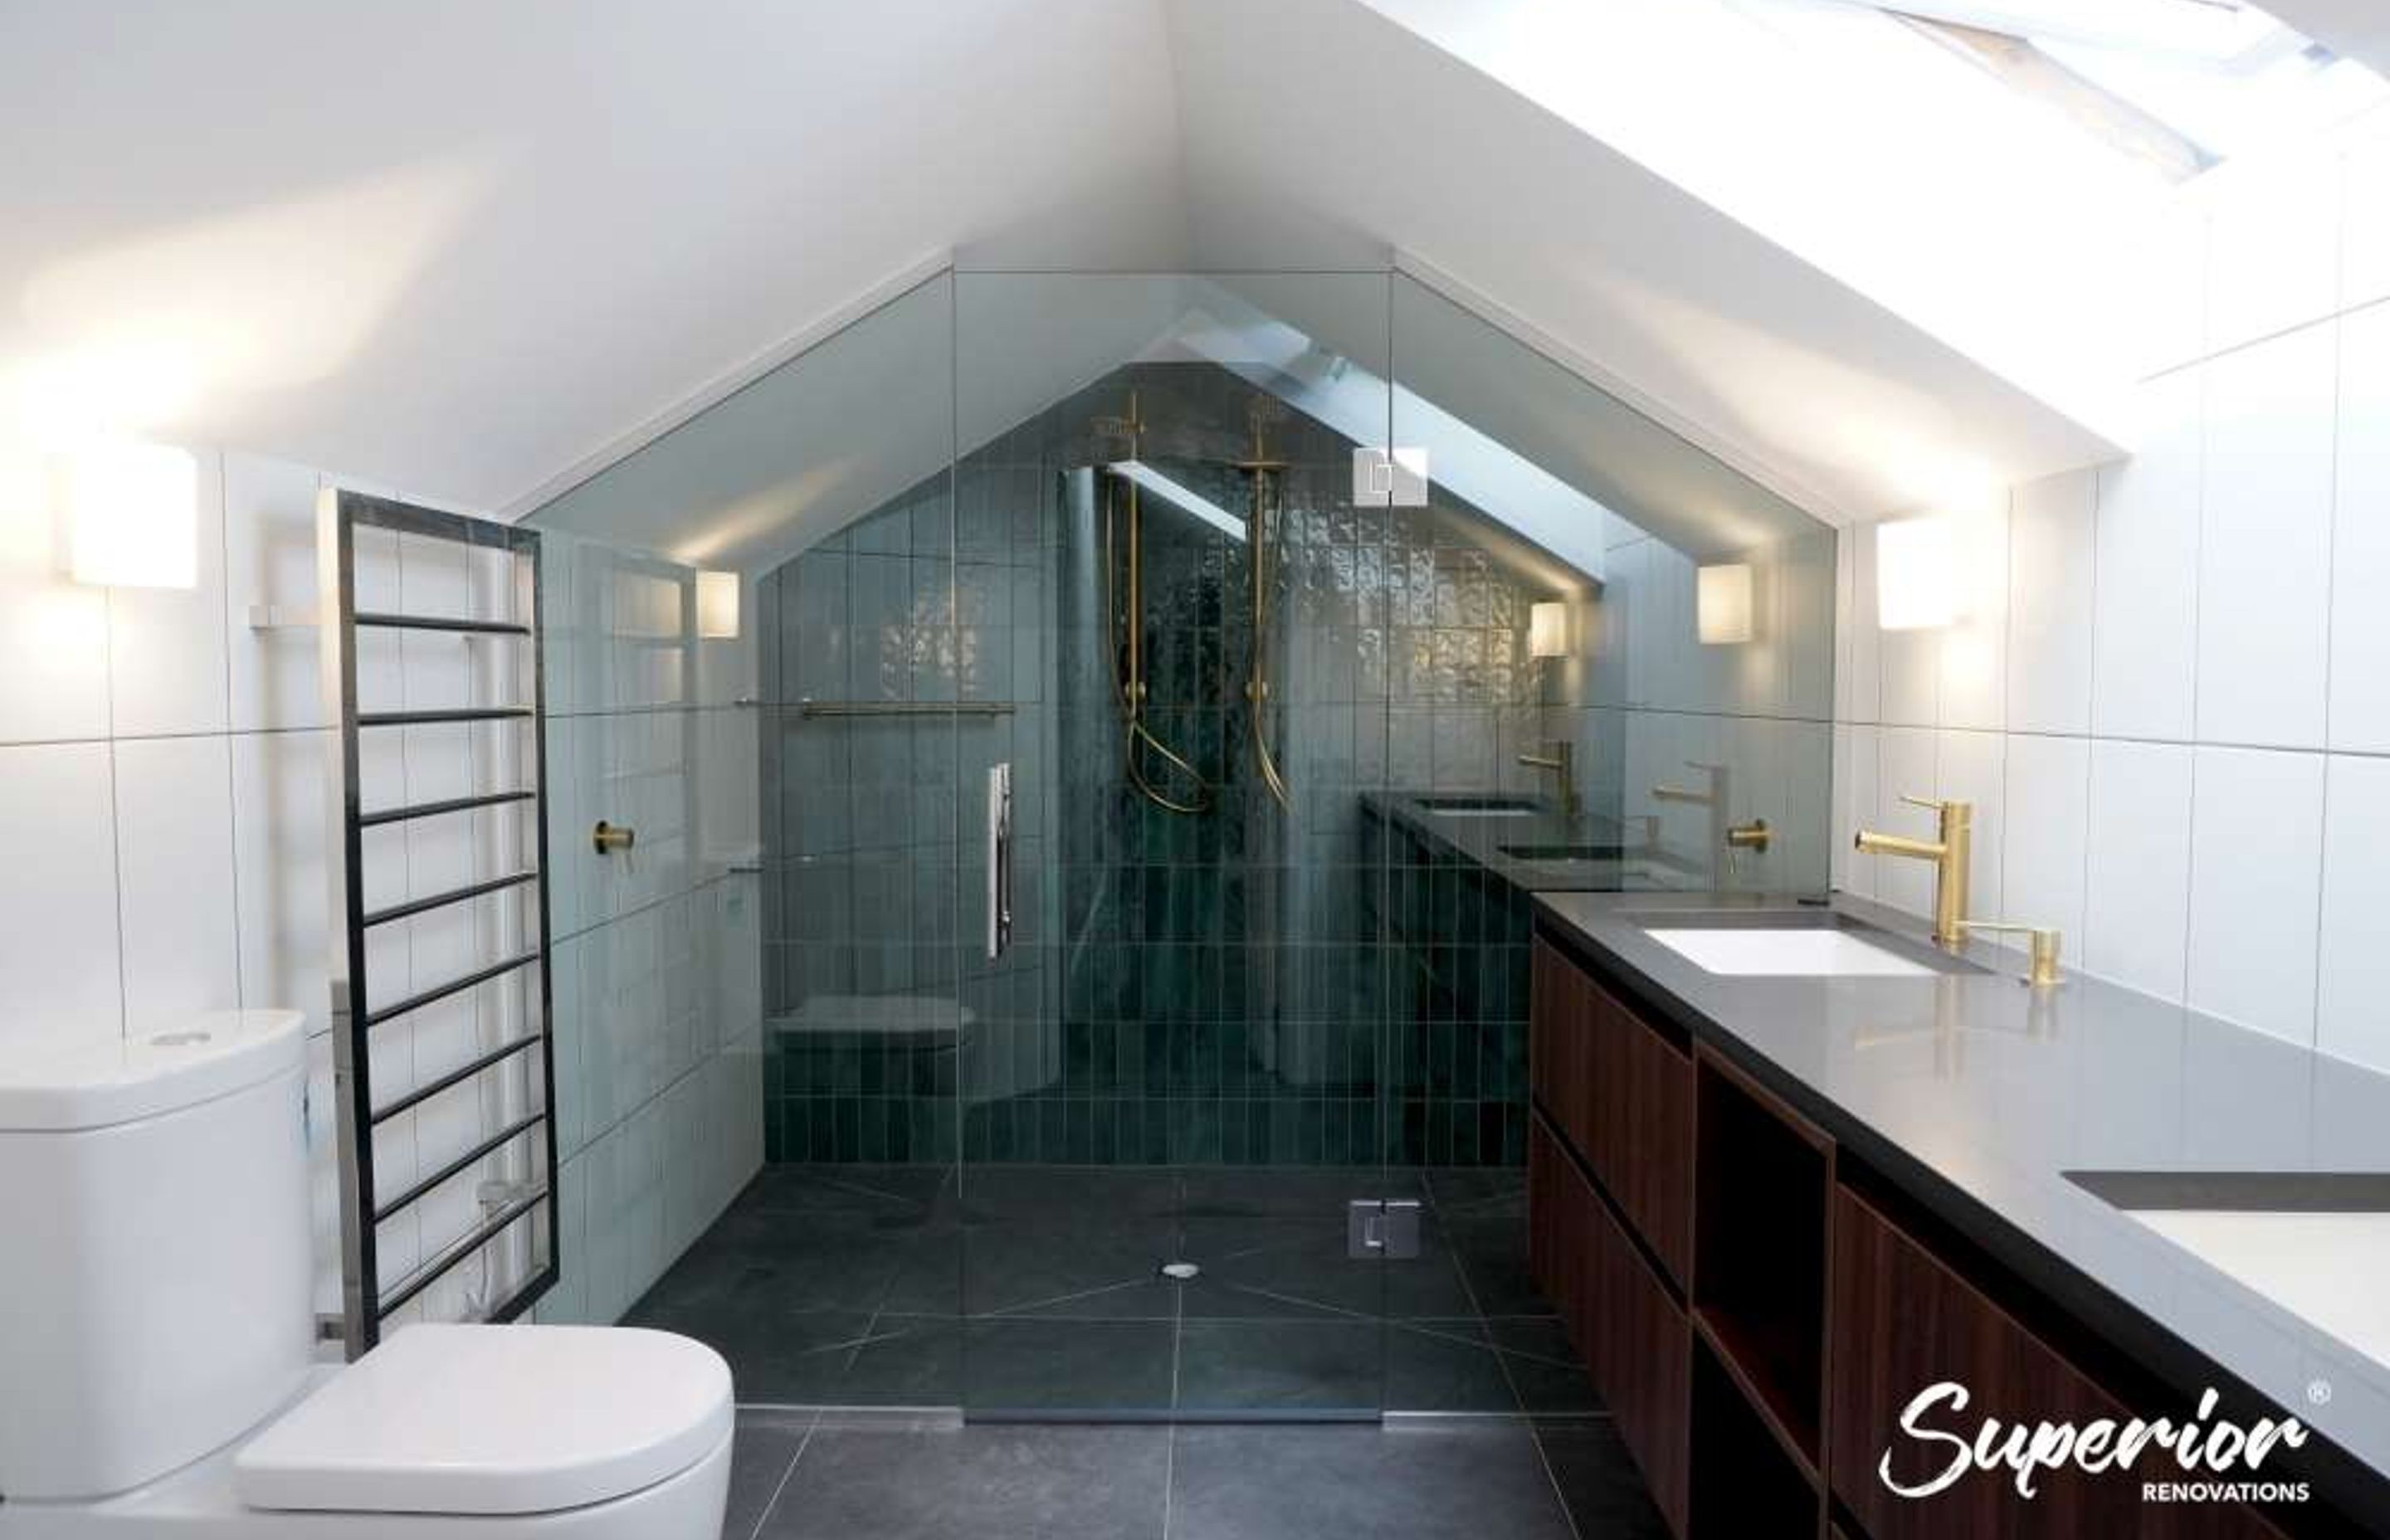 Spacious shower integrated in this bathroom design for a renovation in Westmere